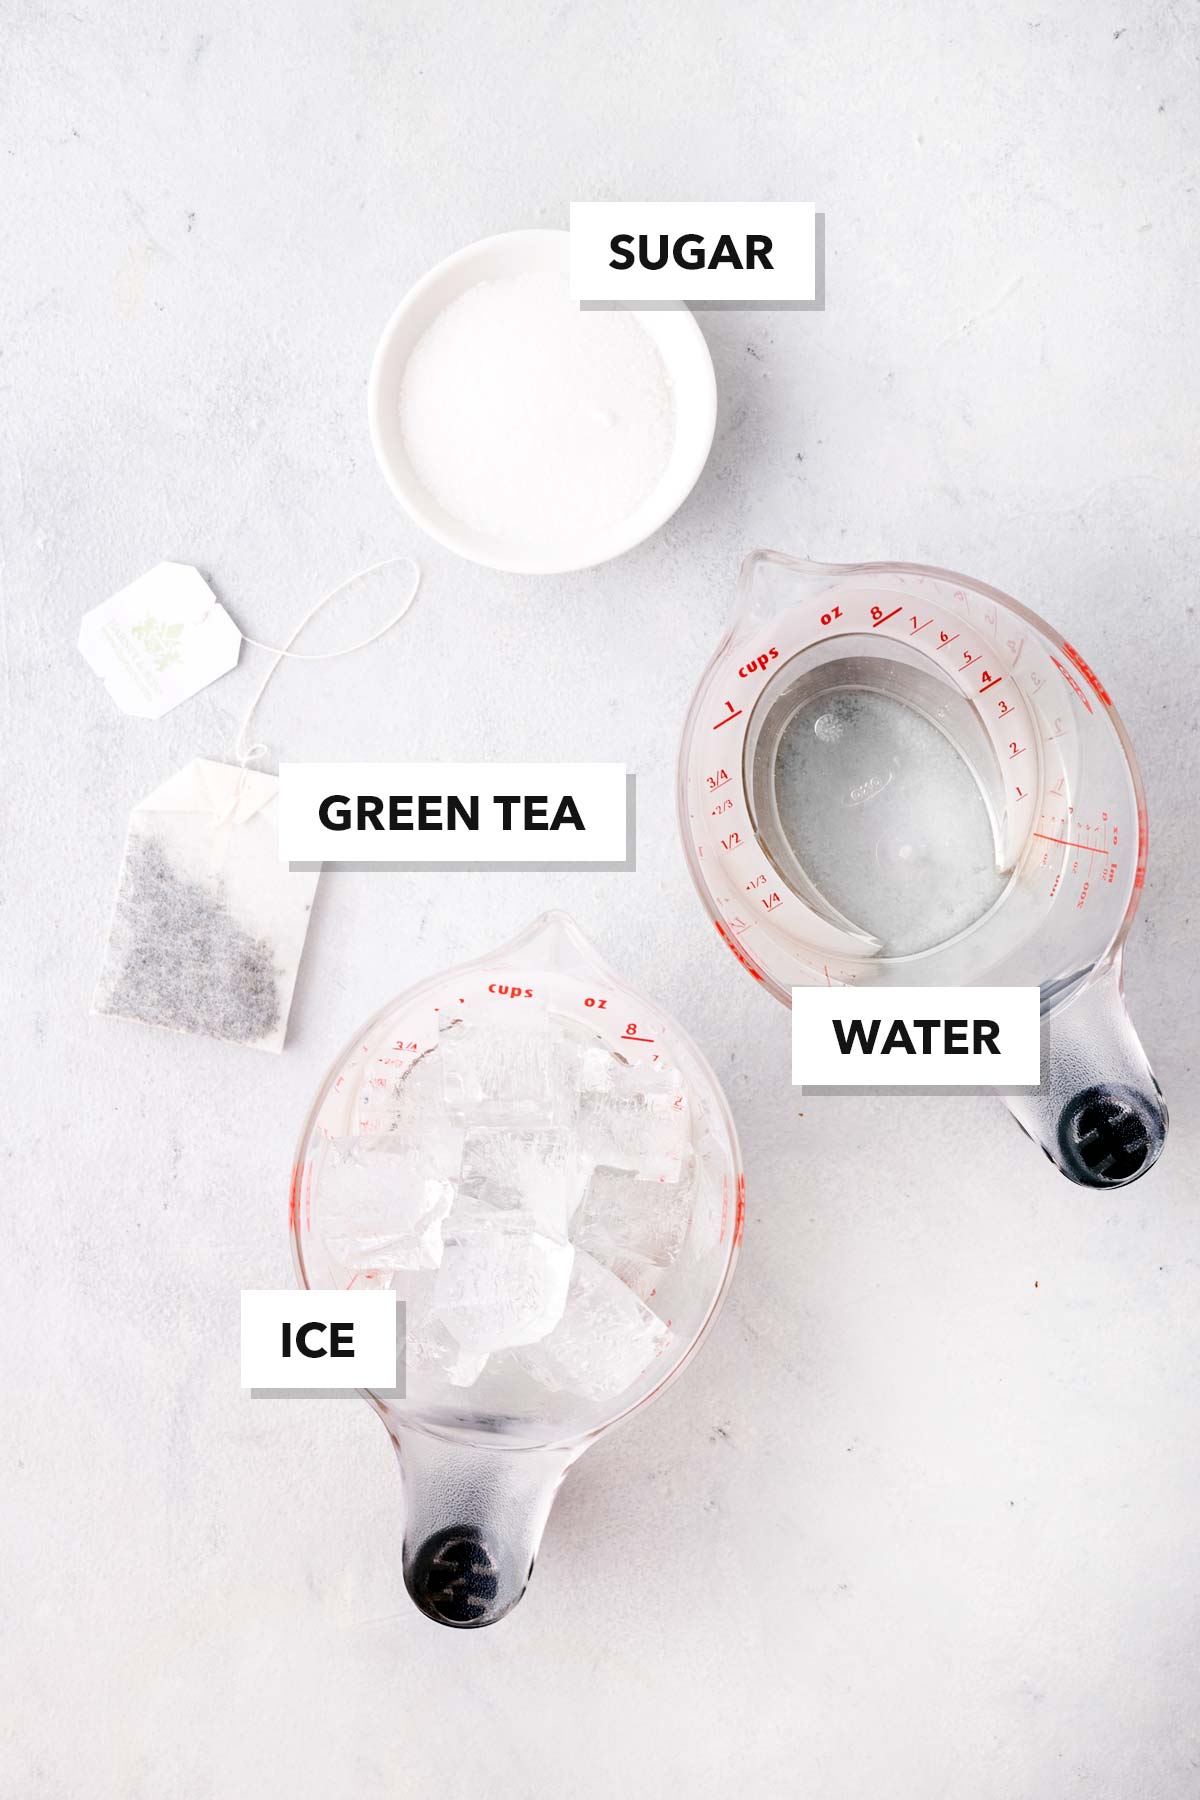 Iced Green Tea ingredients measured in cups and labeled on a table.